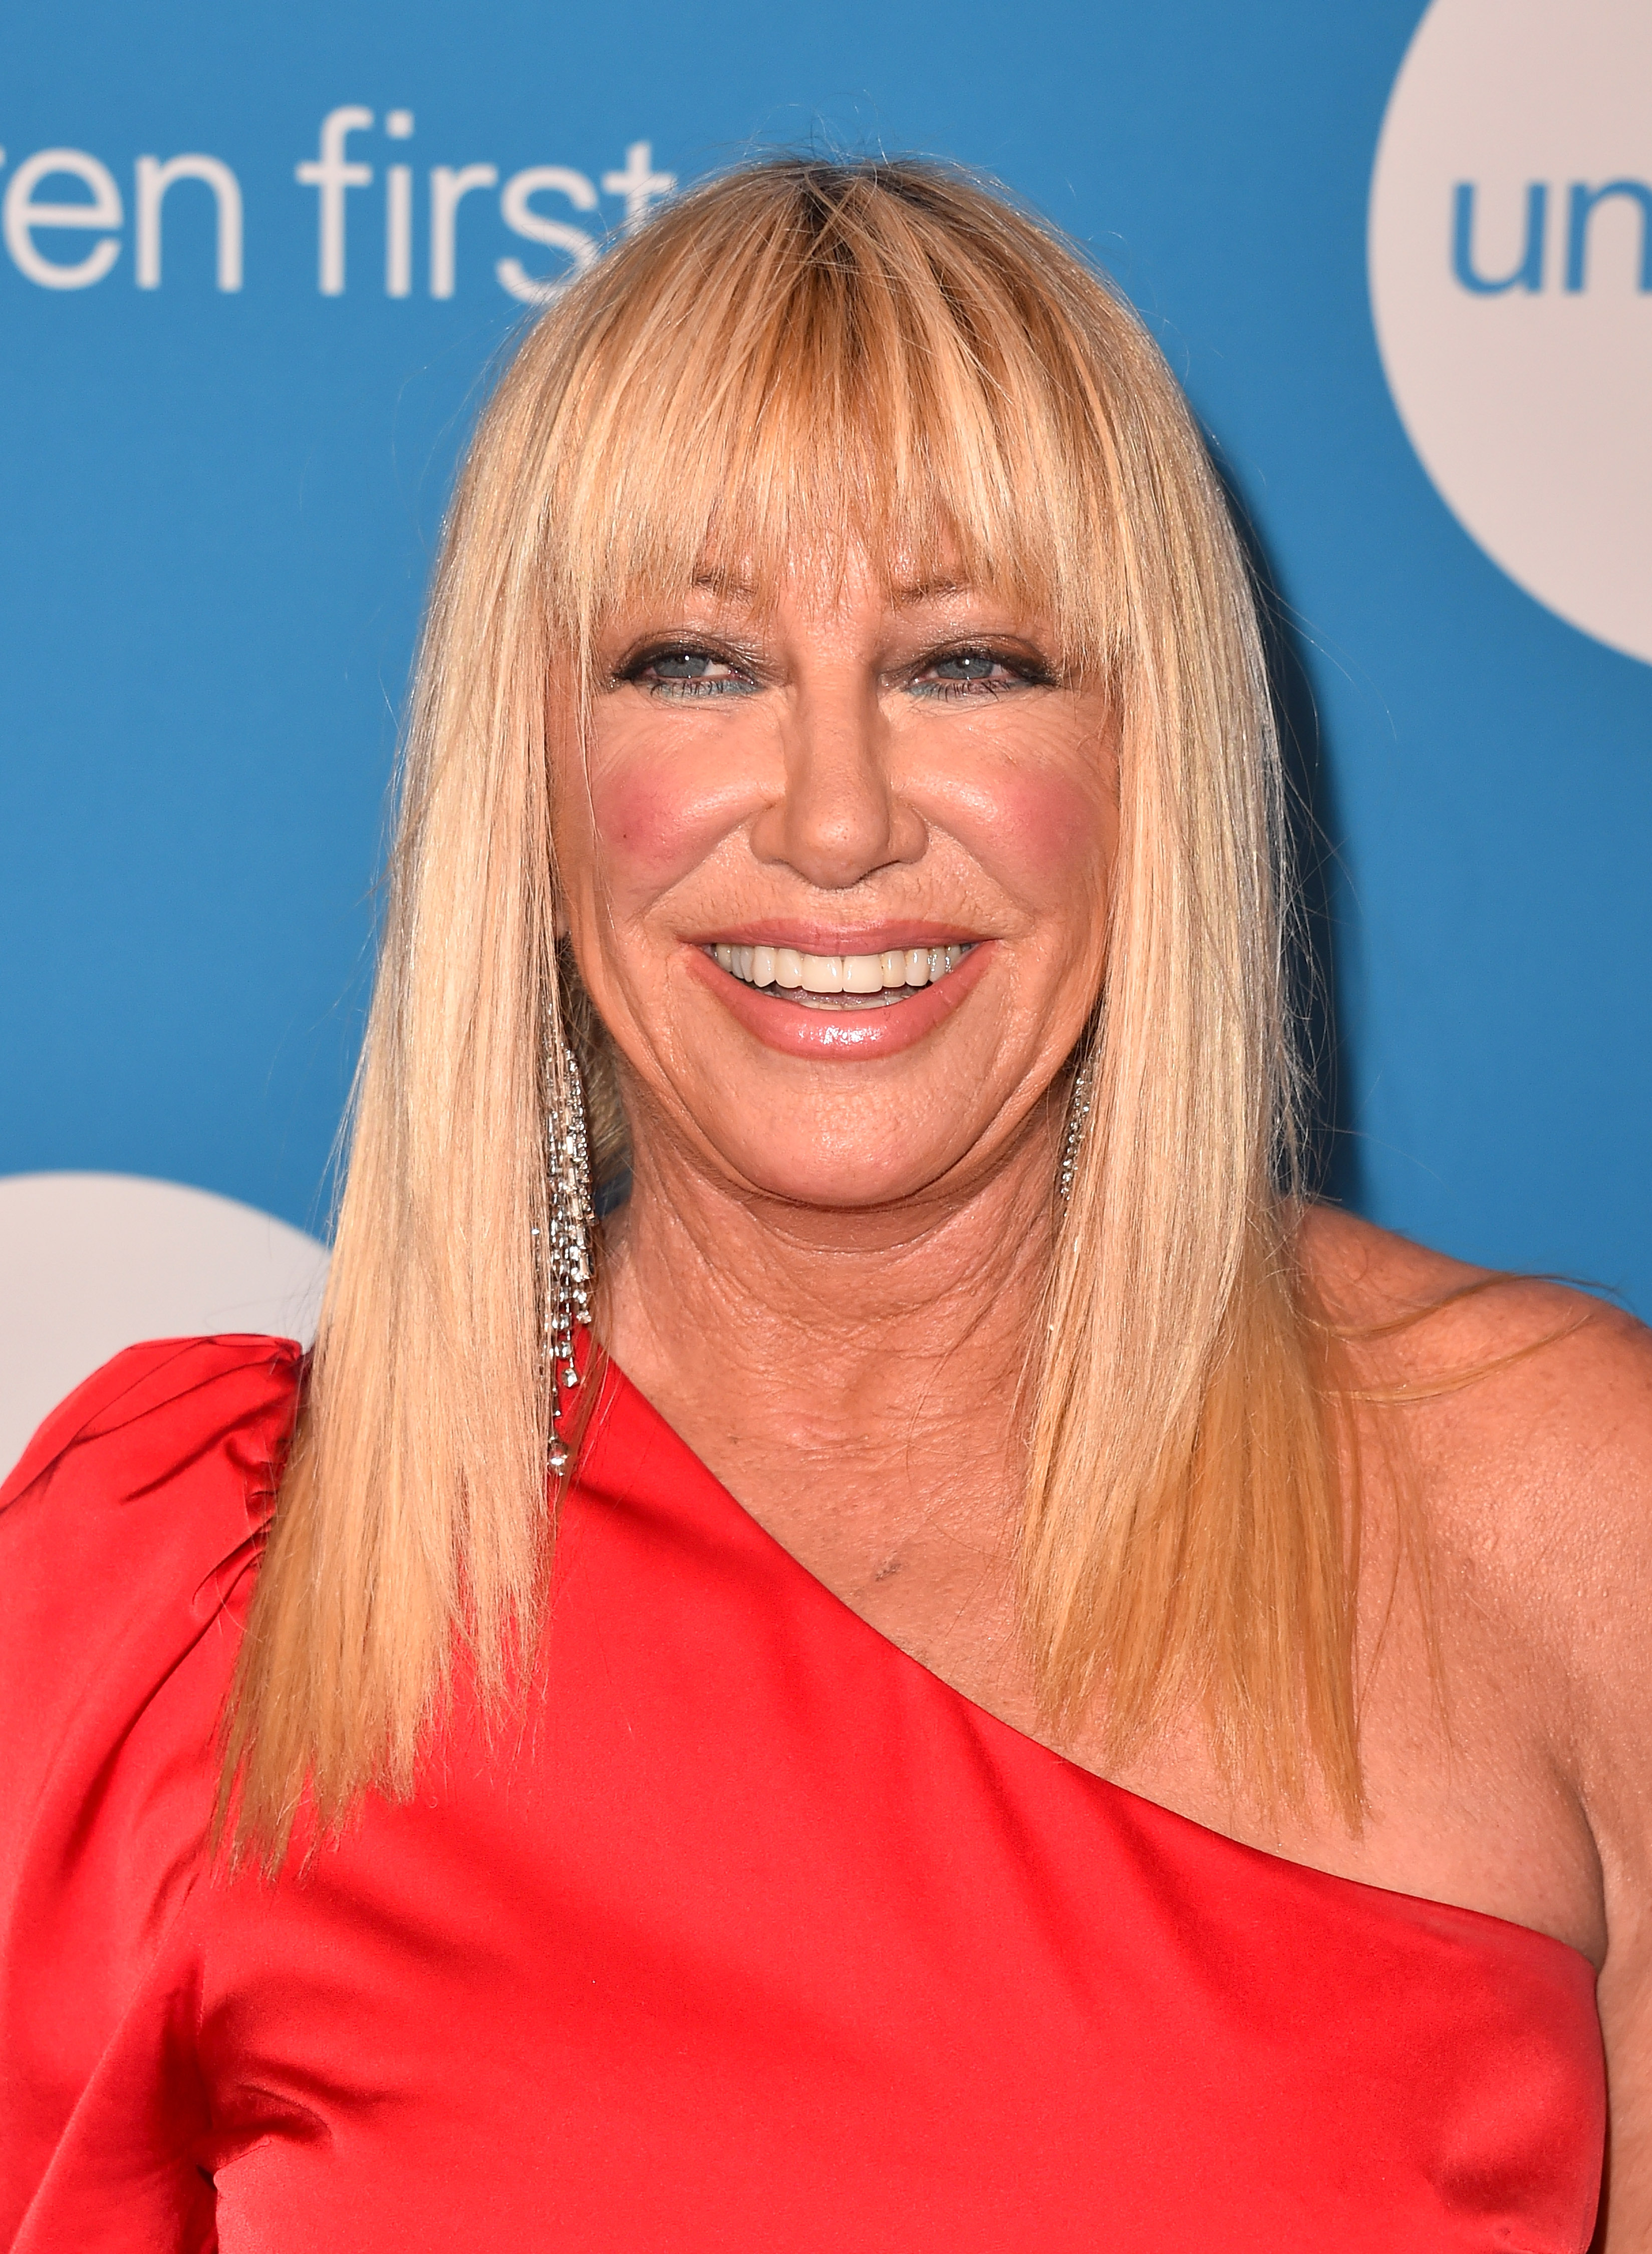 Suzanne Somers at the 7th Biennial UNICEF Ball in Beverly Hills, California, on April 14, 2018 | Source: Getty Images